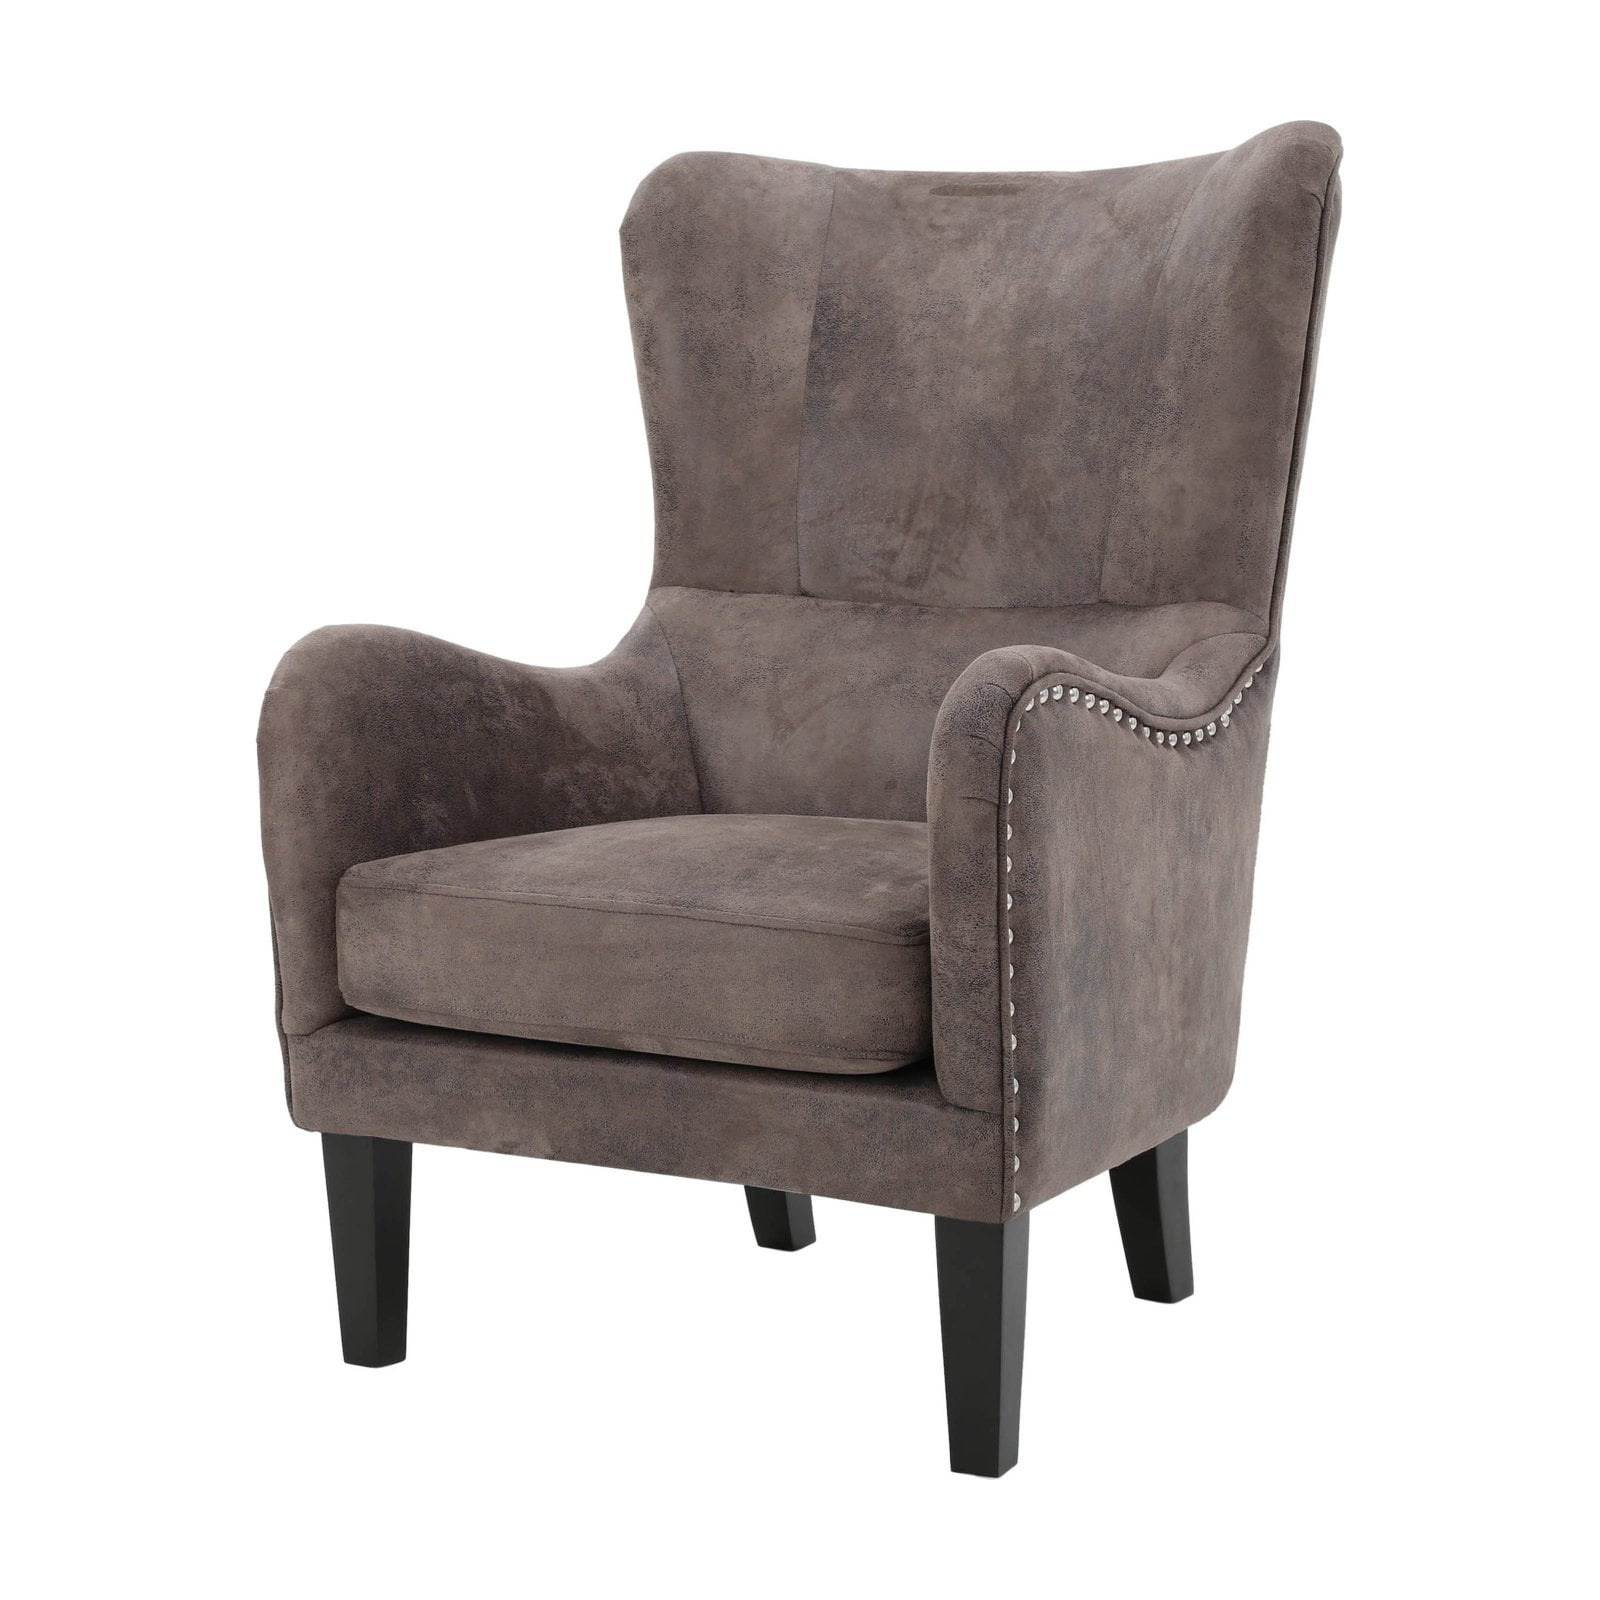 Lorenzo Upholstered High Back Studded Accent Chair - Walmart.com